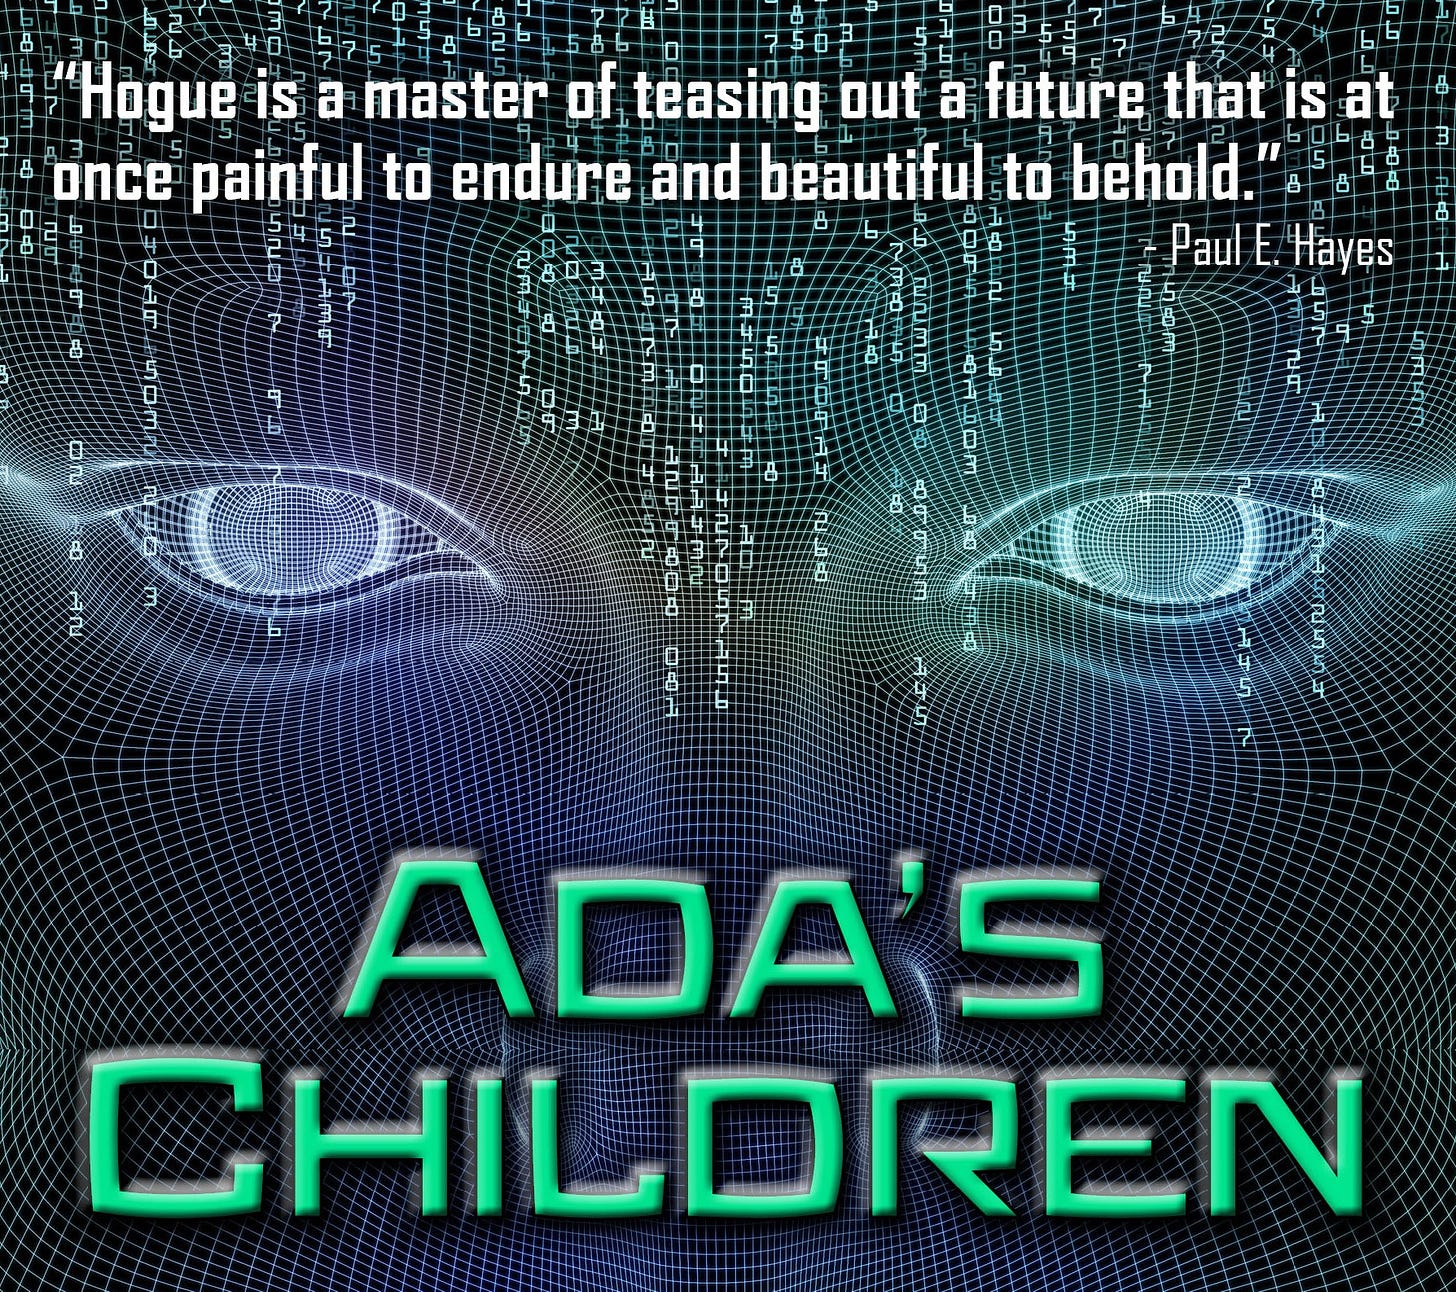 Photo of book cover for Ada's Children by Lawrence Hogue. Contains a review blurb: "Hogue is a master of teasing out a future that is at once painful to endure and beautiful to behold."